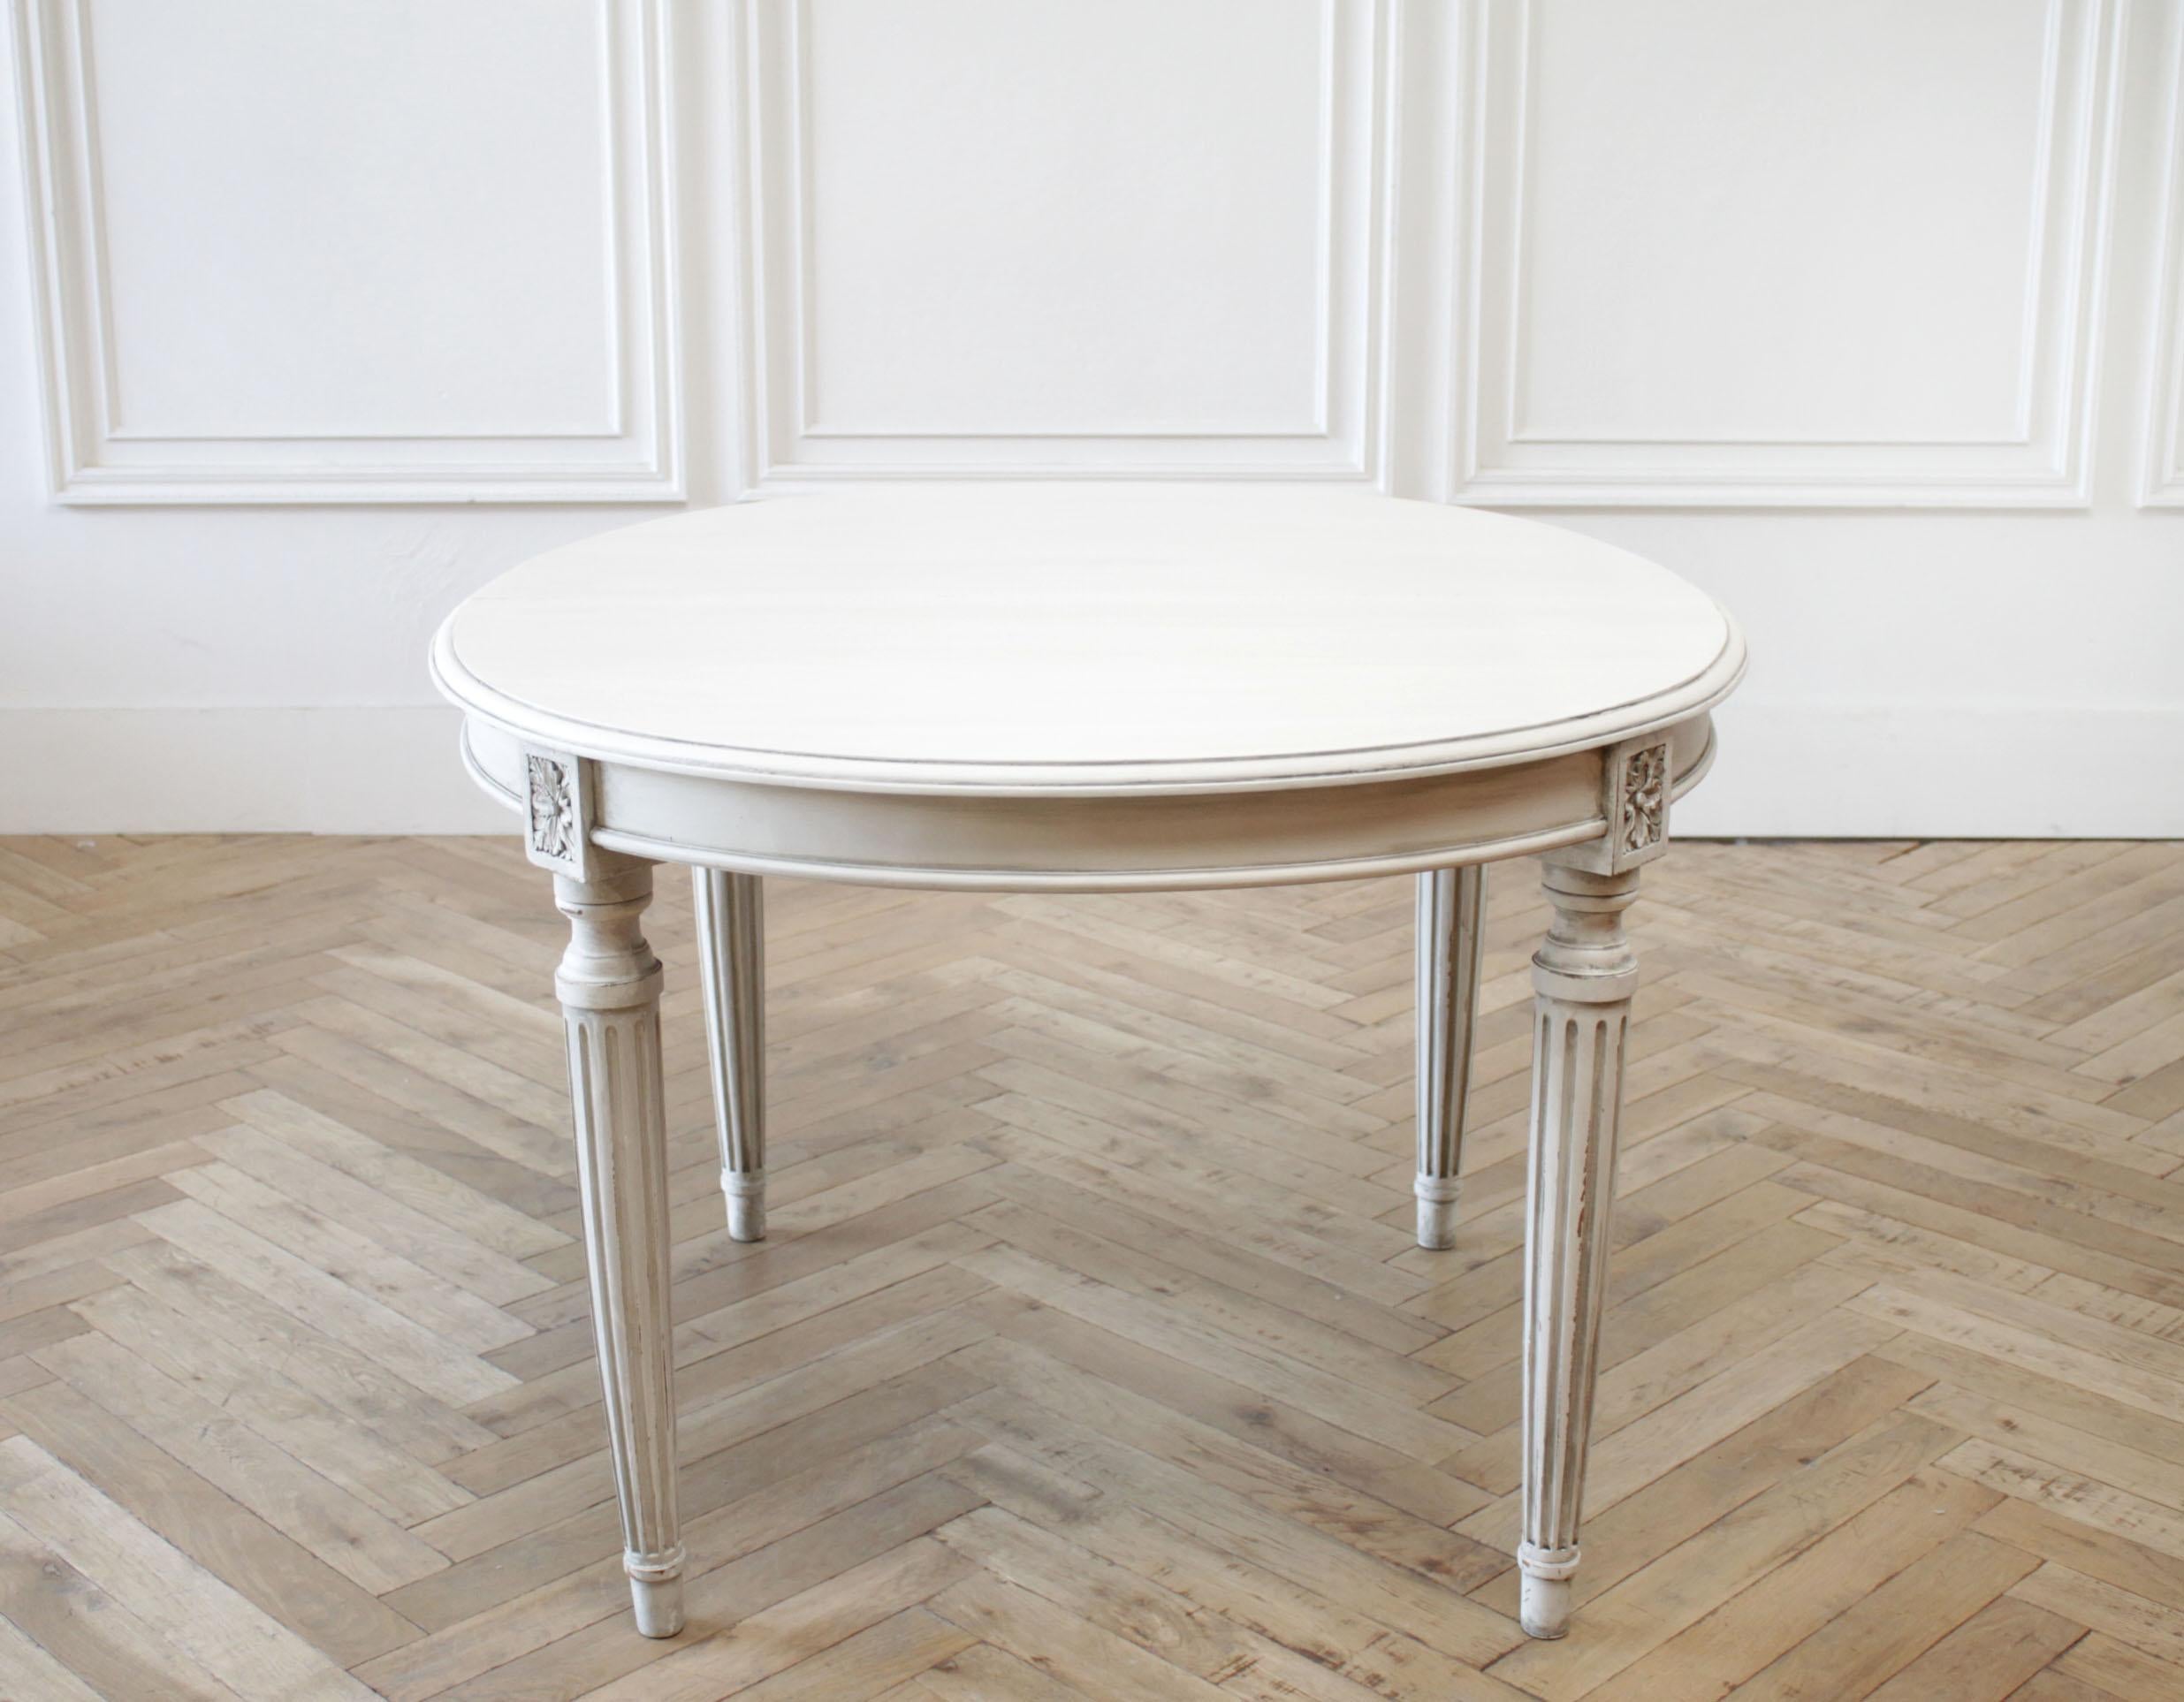 Antique oval Louis XVI style painted dining table
Painted in an oyster color, which is off-white, with subtle distressed edges, and finished with an antique glazed patina. It does lean towards a slight gray tone.
Solid walnut there is a seam in